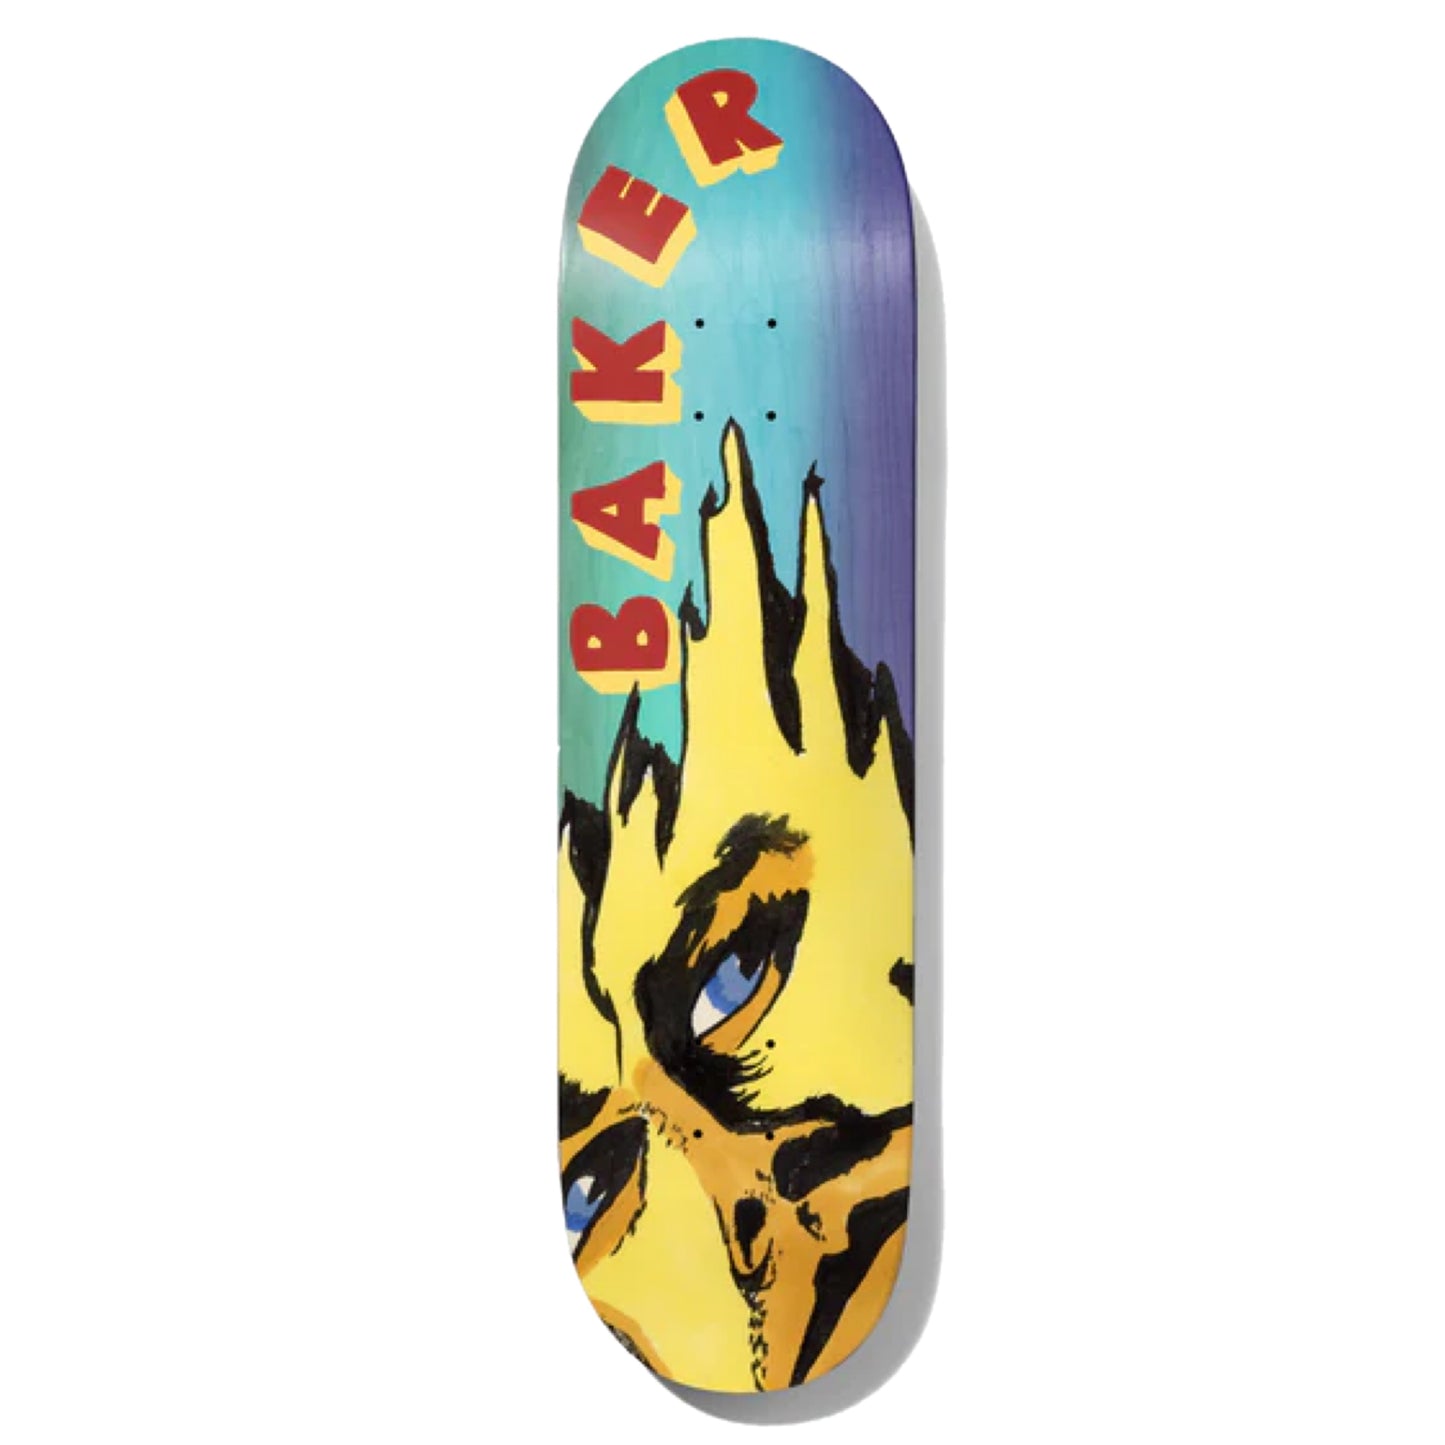 Baker Rowan Dripping Skateboard Deck; Various shades of blue compose background; Red and yellow text spelling out "Baker" in 3d lettering style; Illustrated graphic features abstract yellow human face